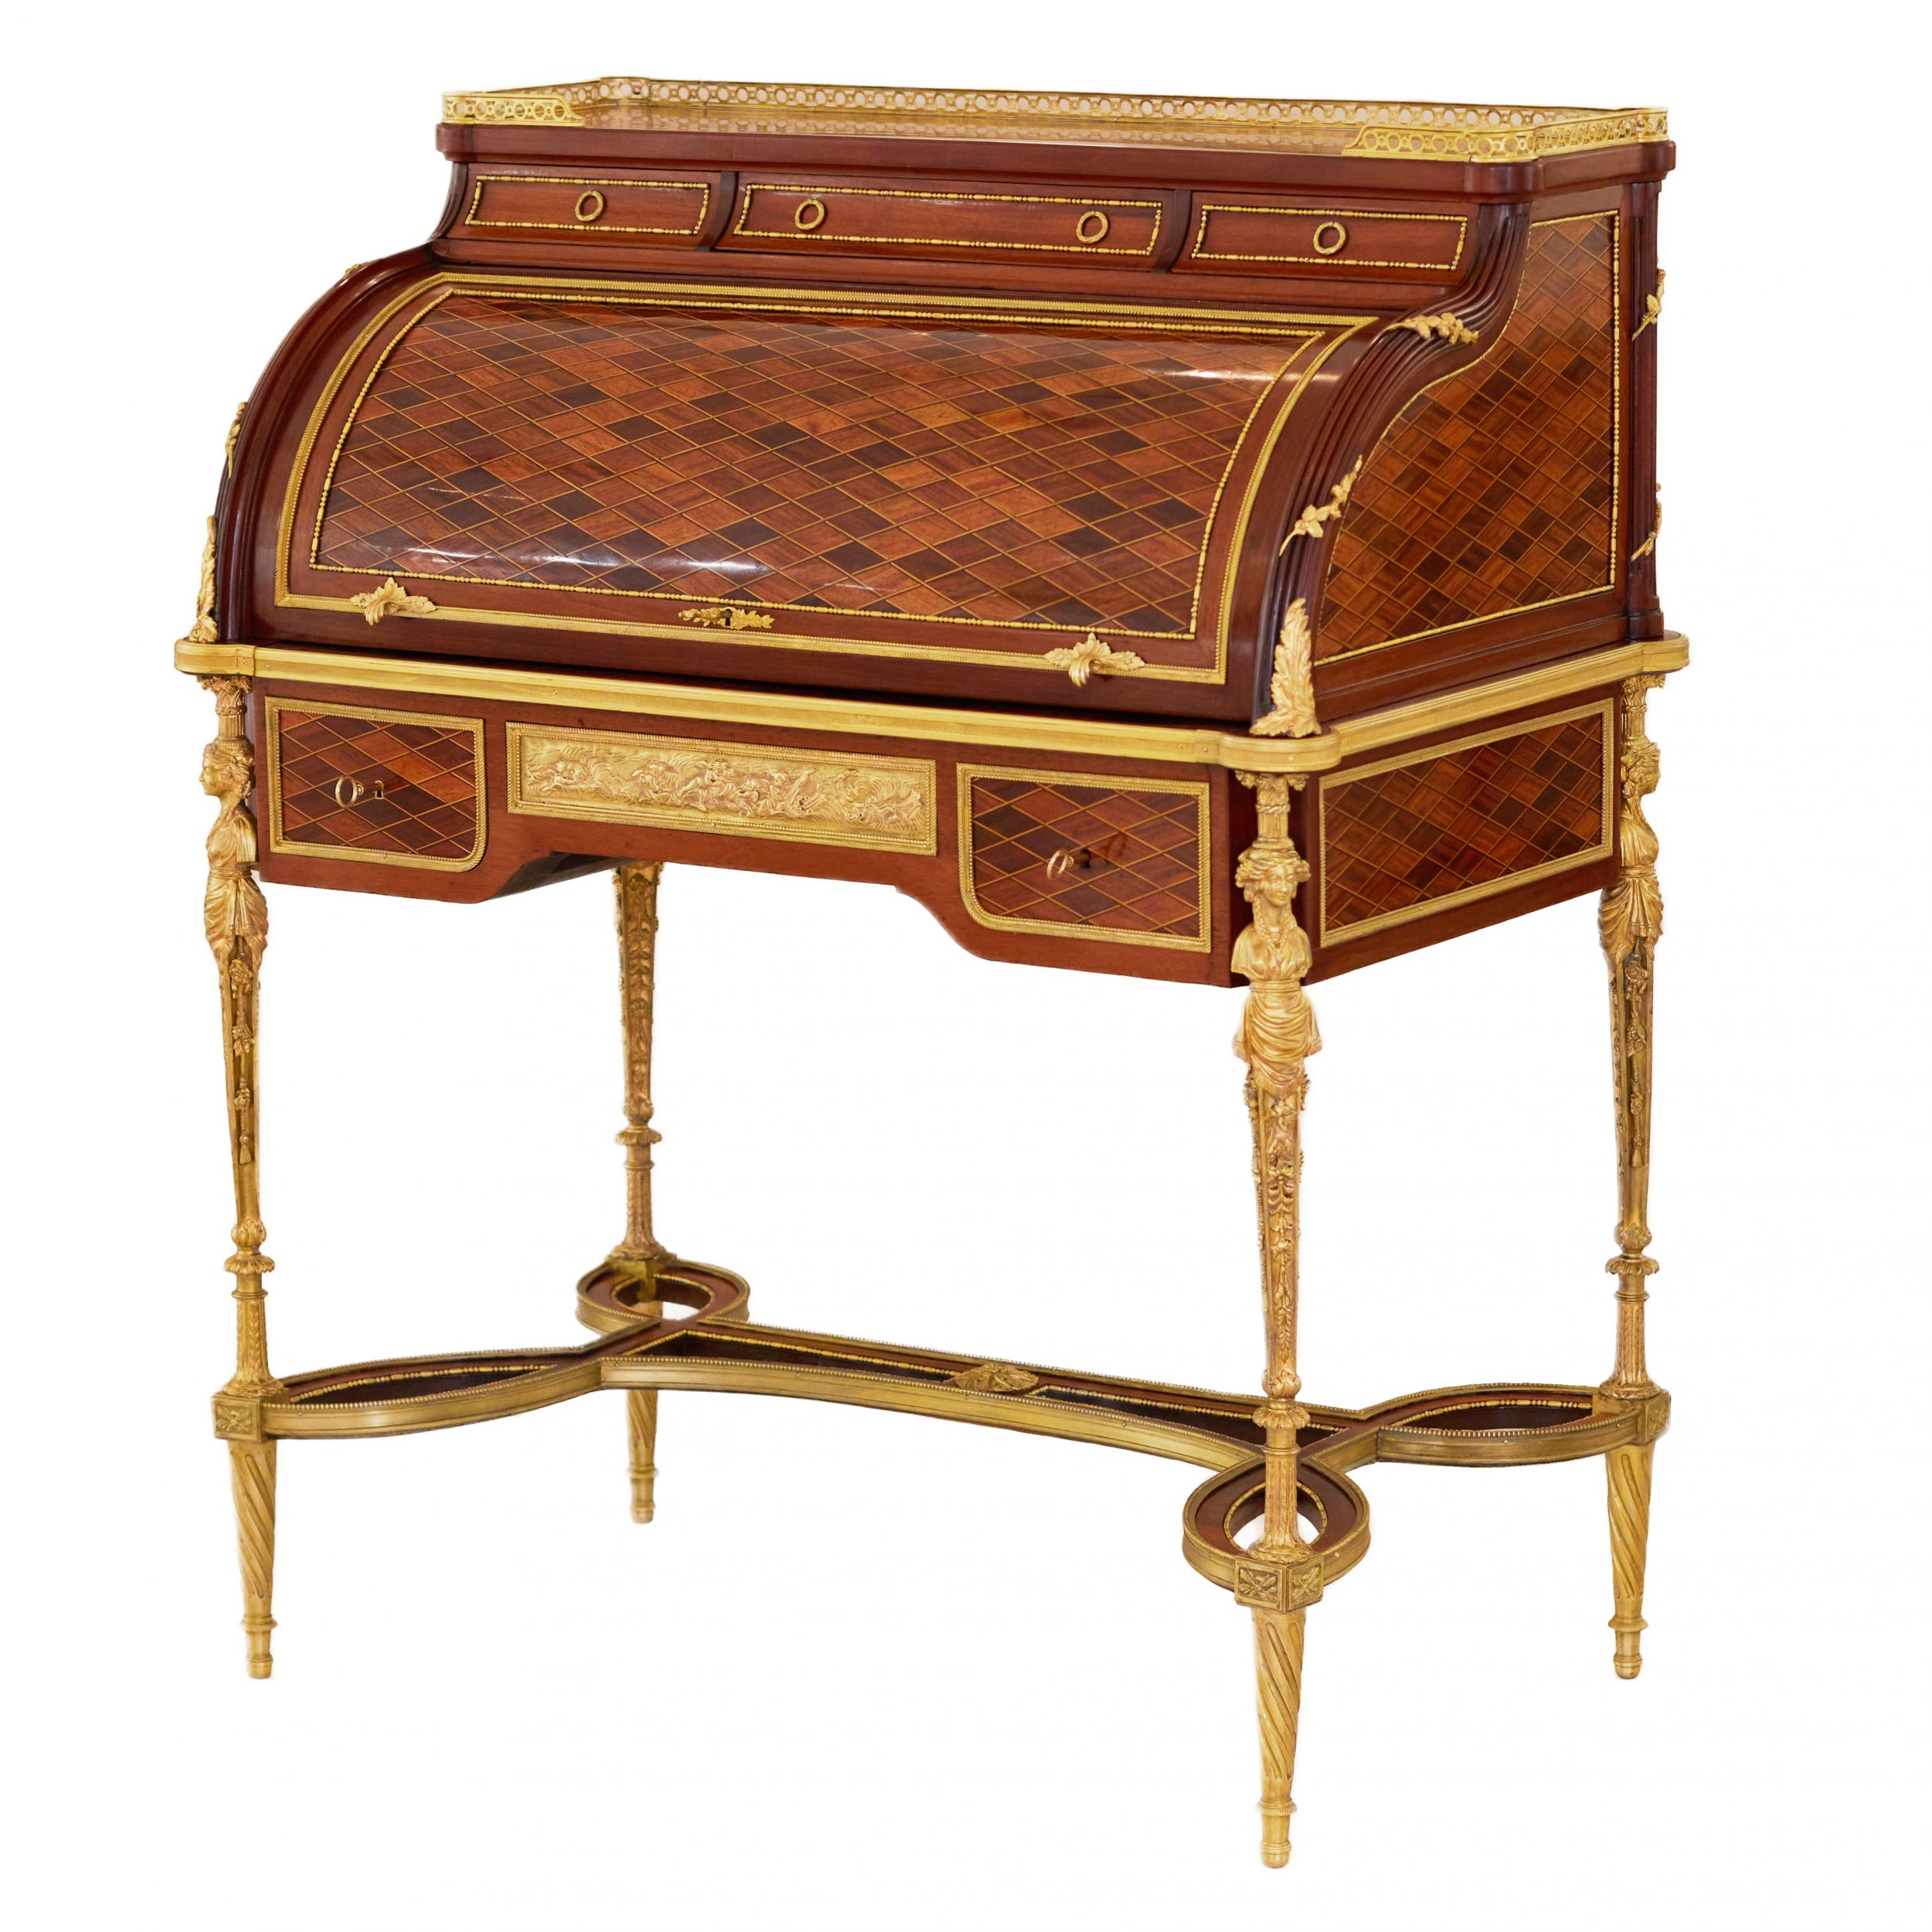 E.KAHN. A magnificent cylindrical bureau in mahogany and satin wood with gilt bronze. - Image 2 of 14